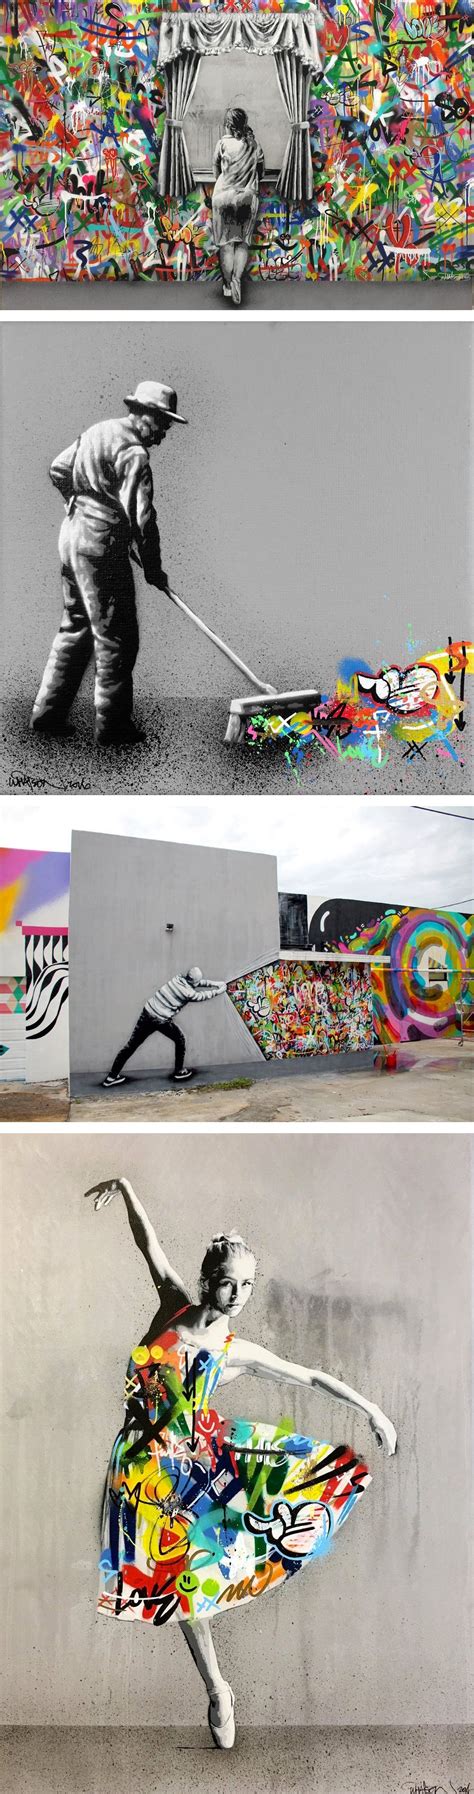 Stencil Art That Blends Graffiti And Decay By Martin Whatson Urban